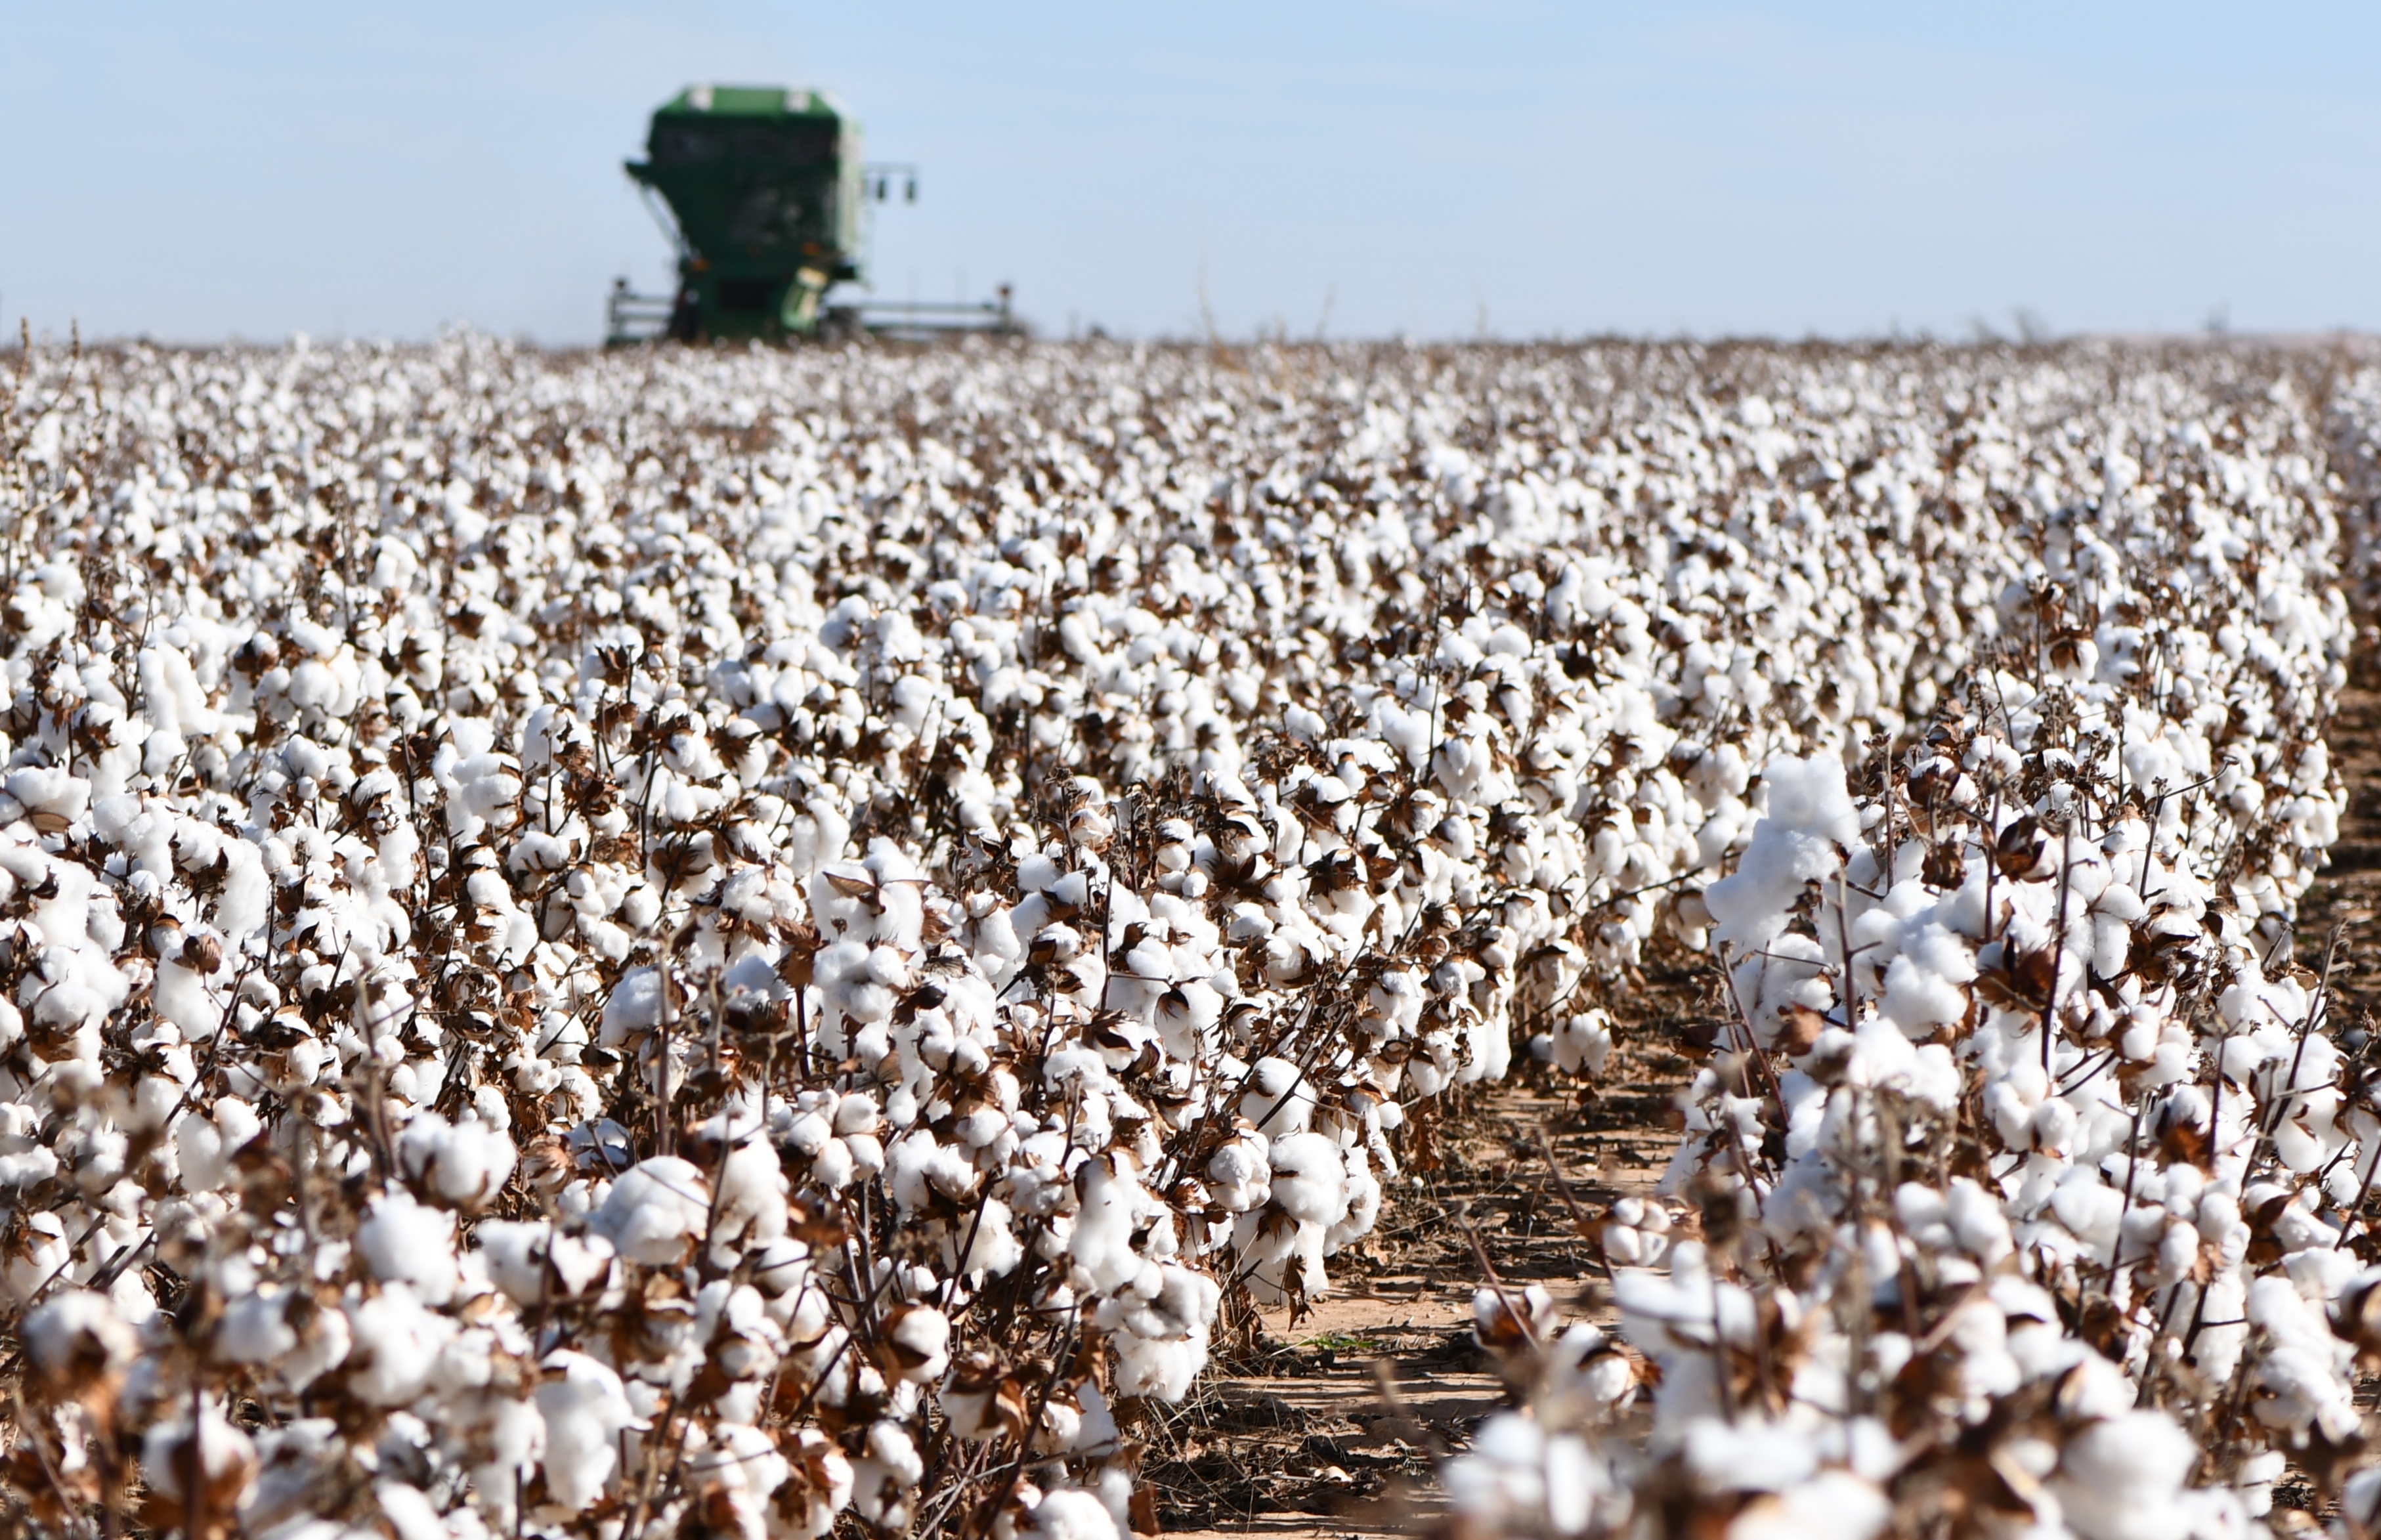 Cotton acreage continues climb in northern Texas Panhandle - AgriLife Today